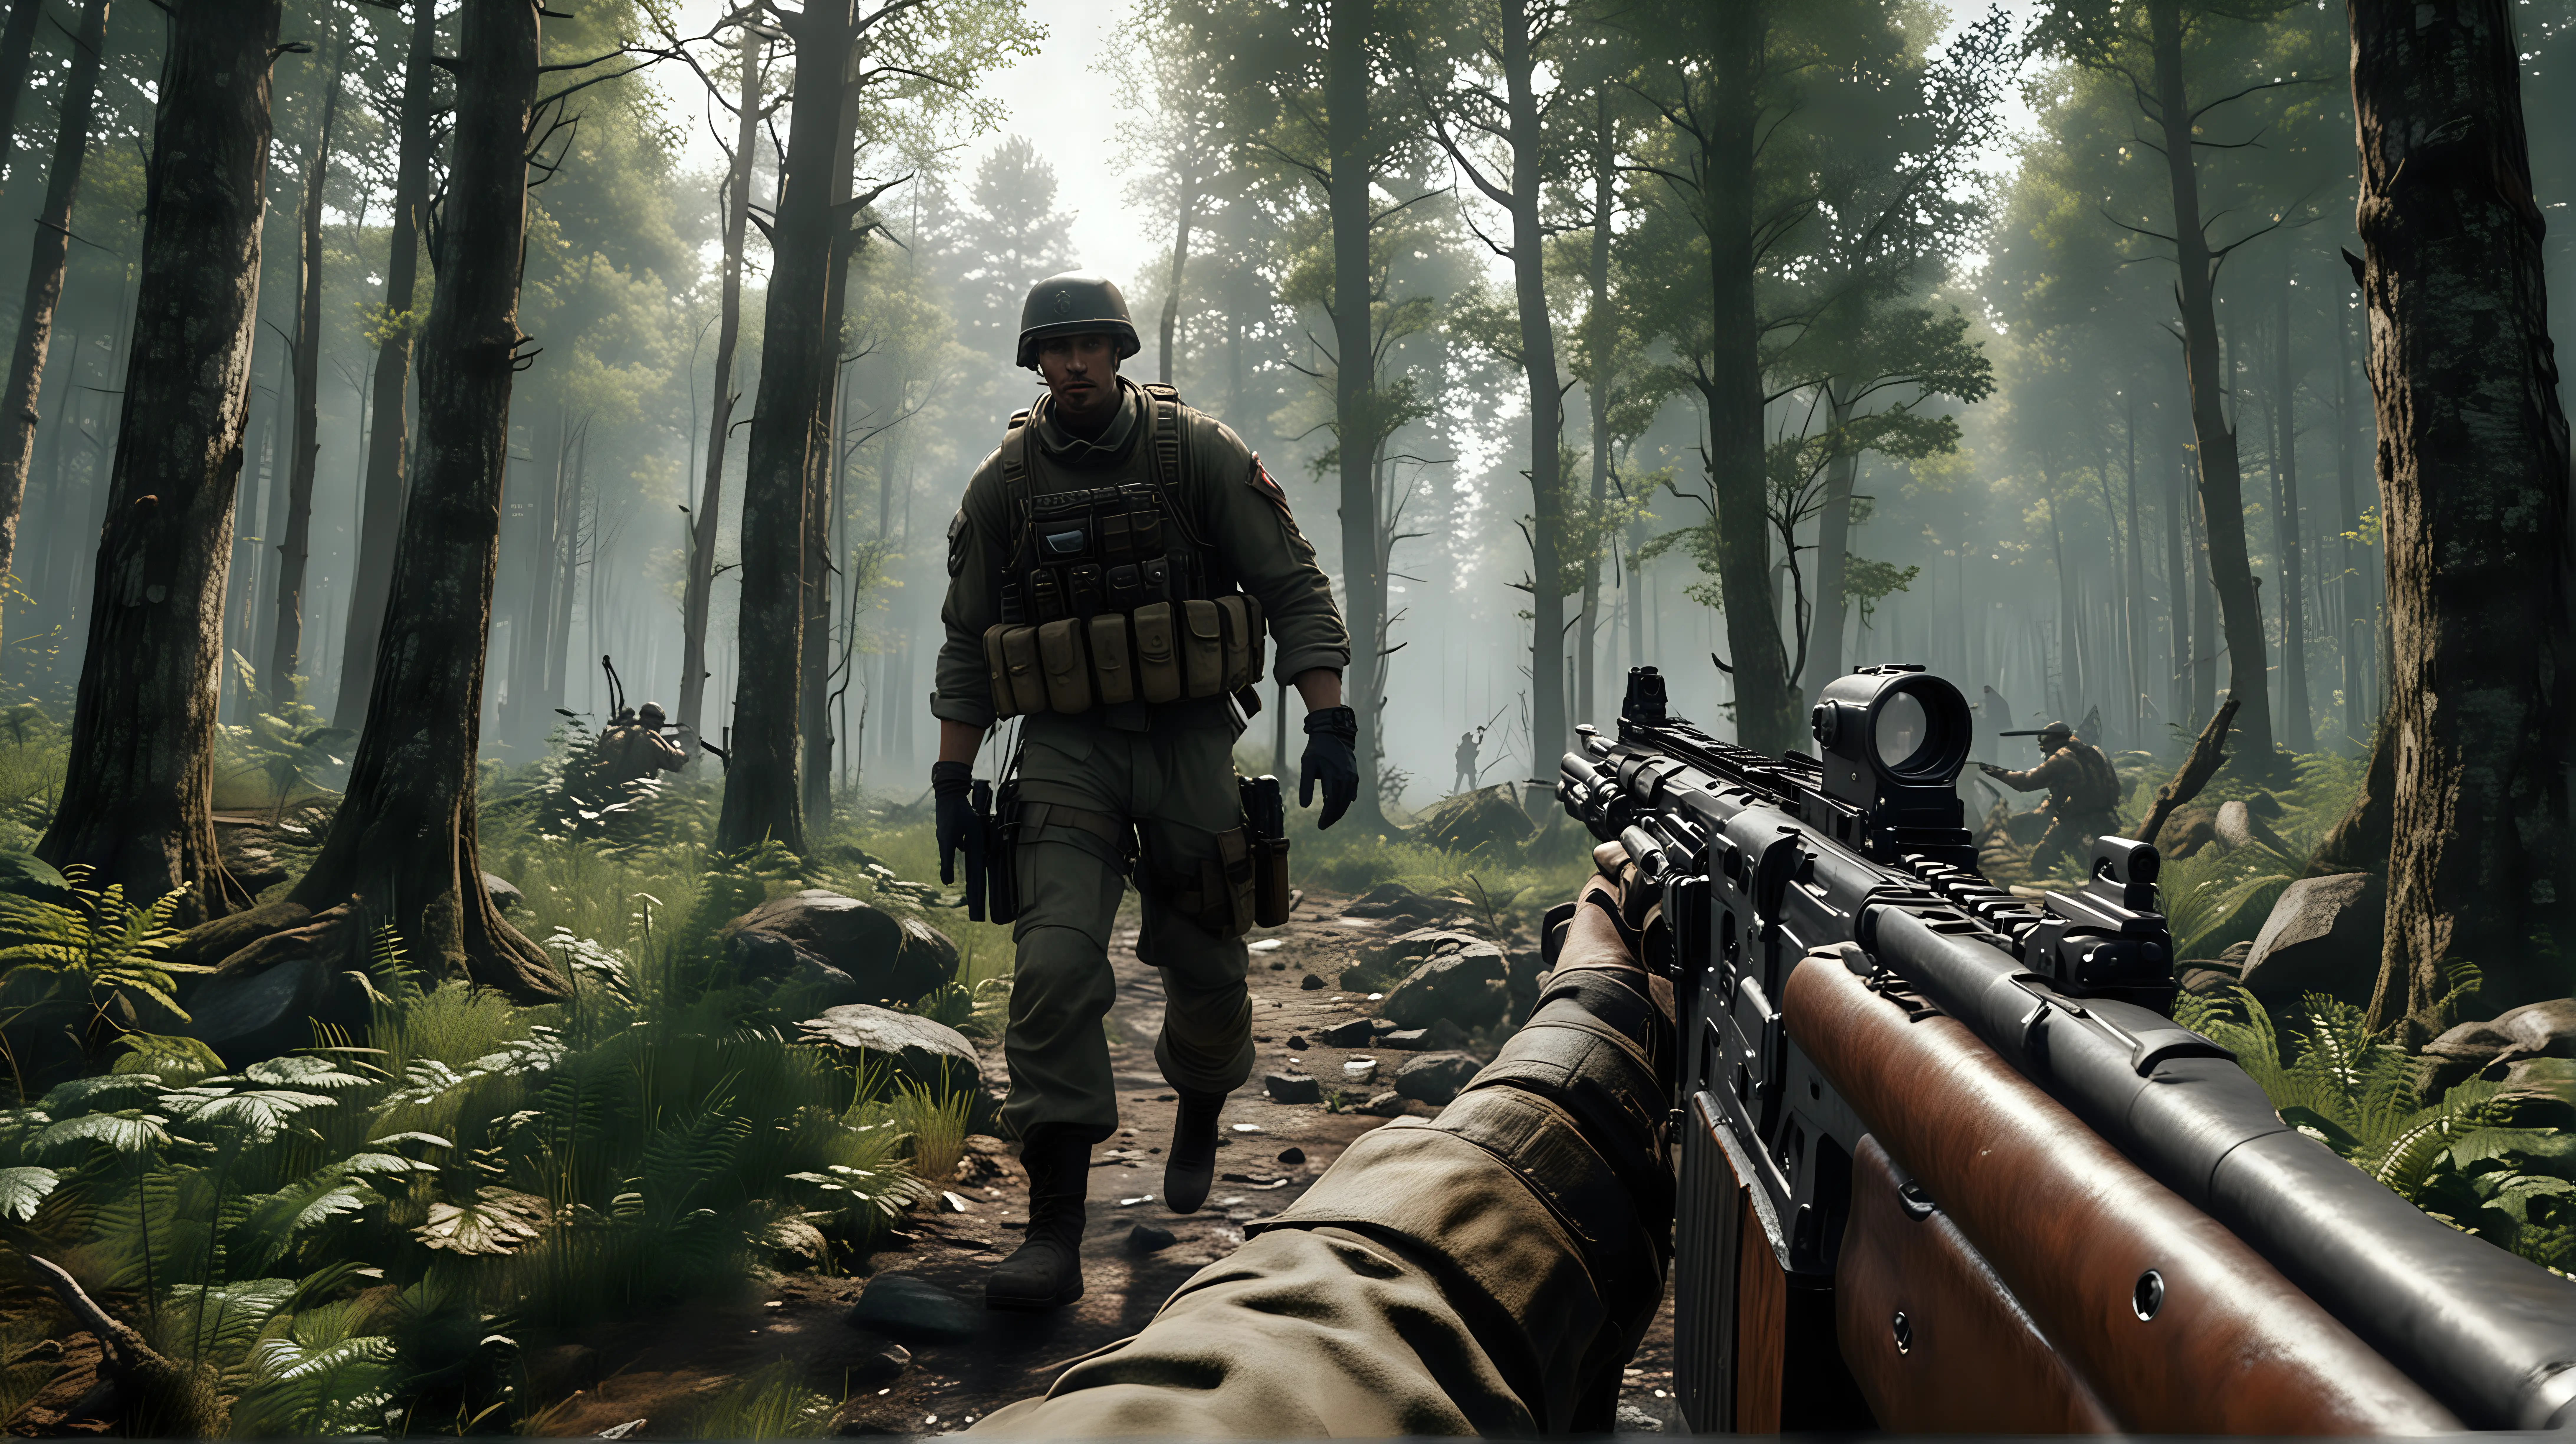 Soldier Shooting Enemies in Dense Forest Environment